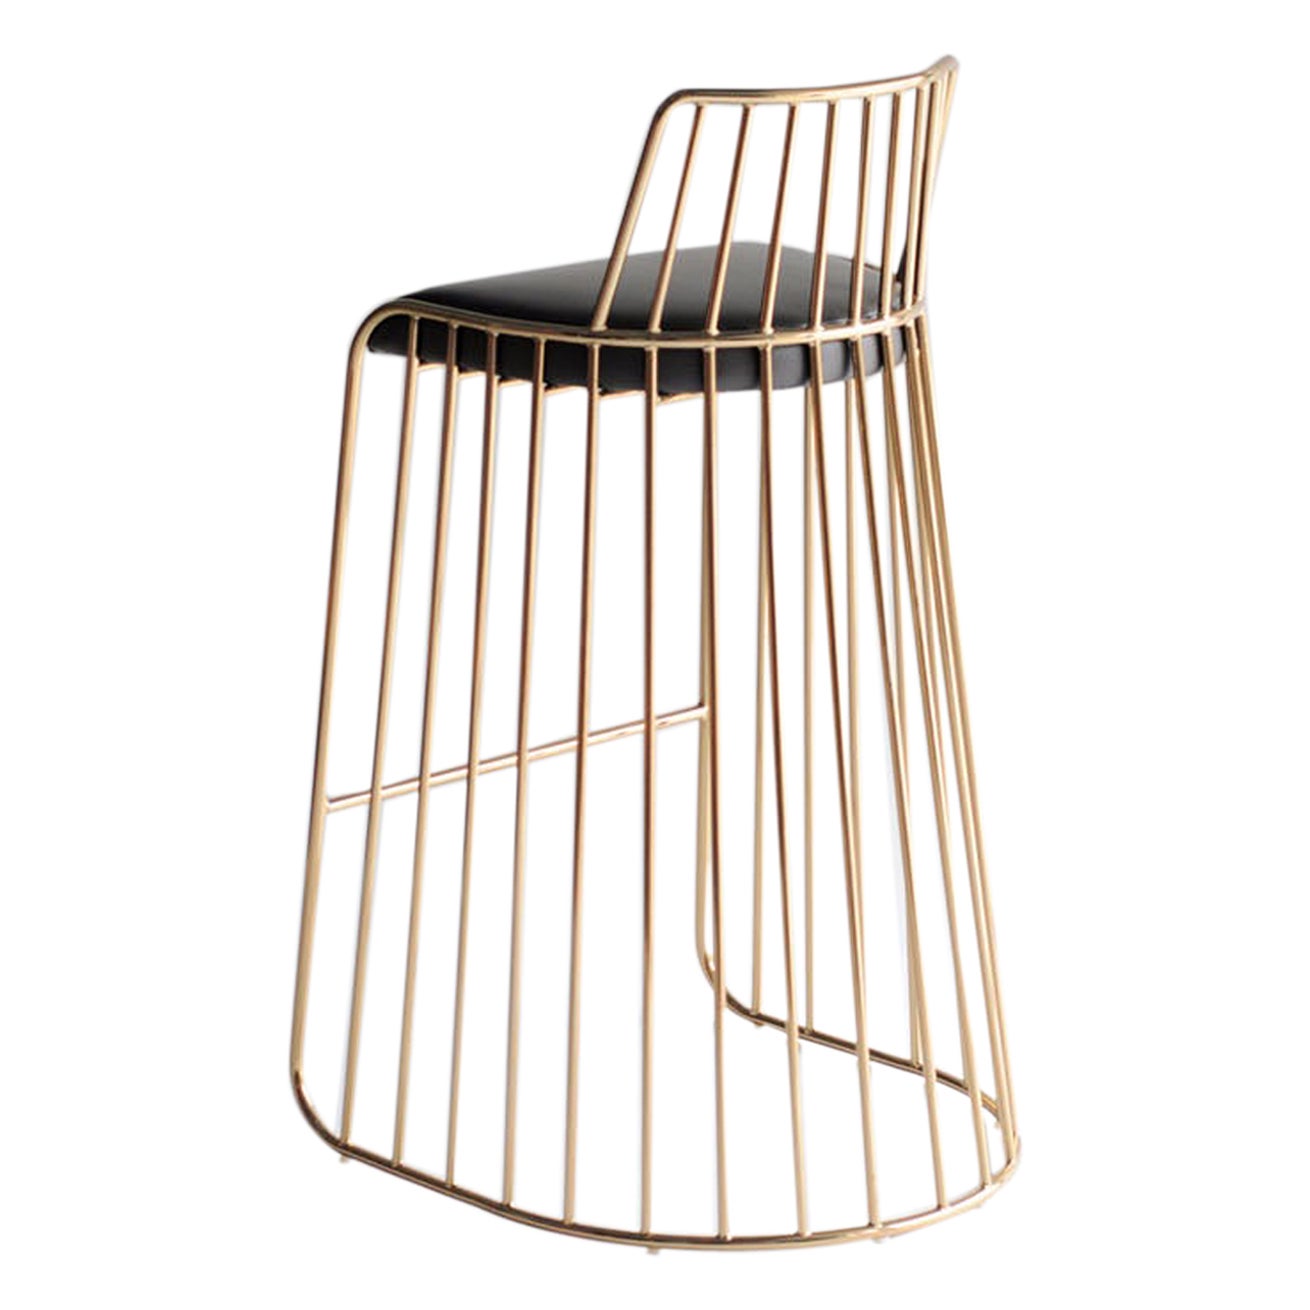 Bride's Veil Bar Stool with Back by Phase Design, Smoked Brass